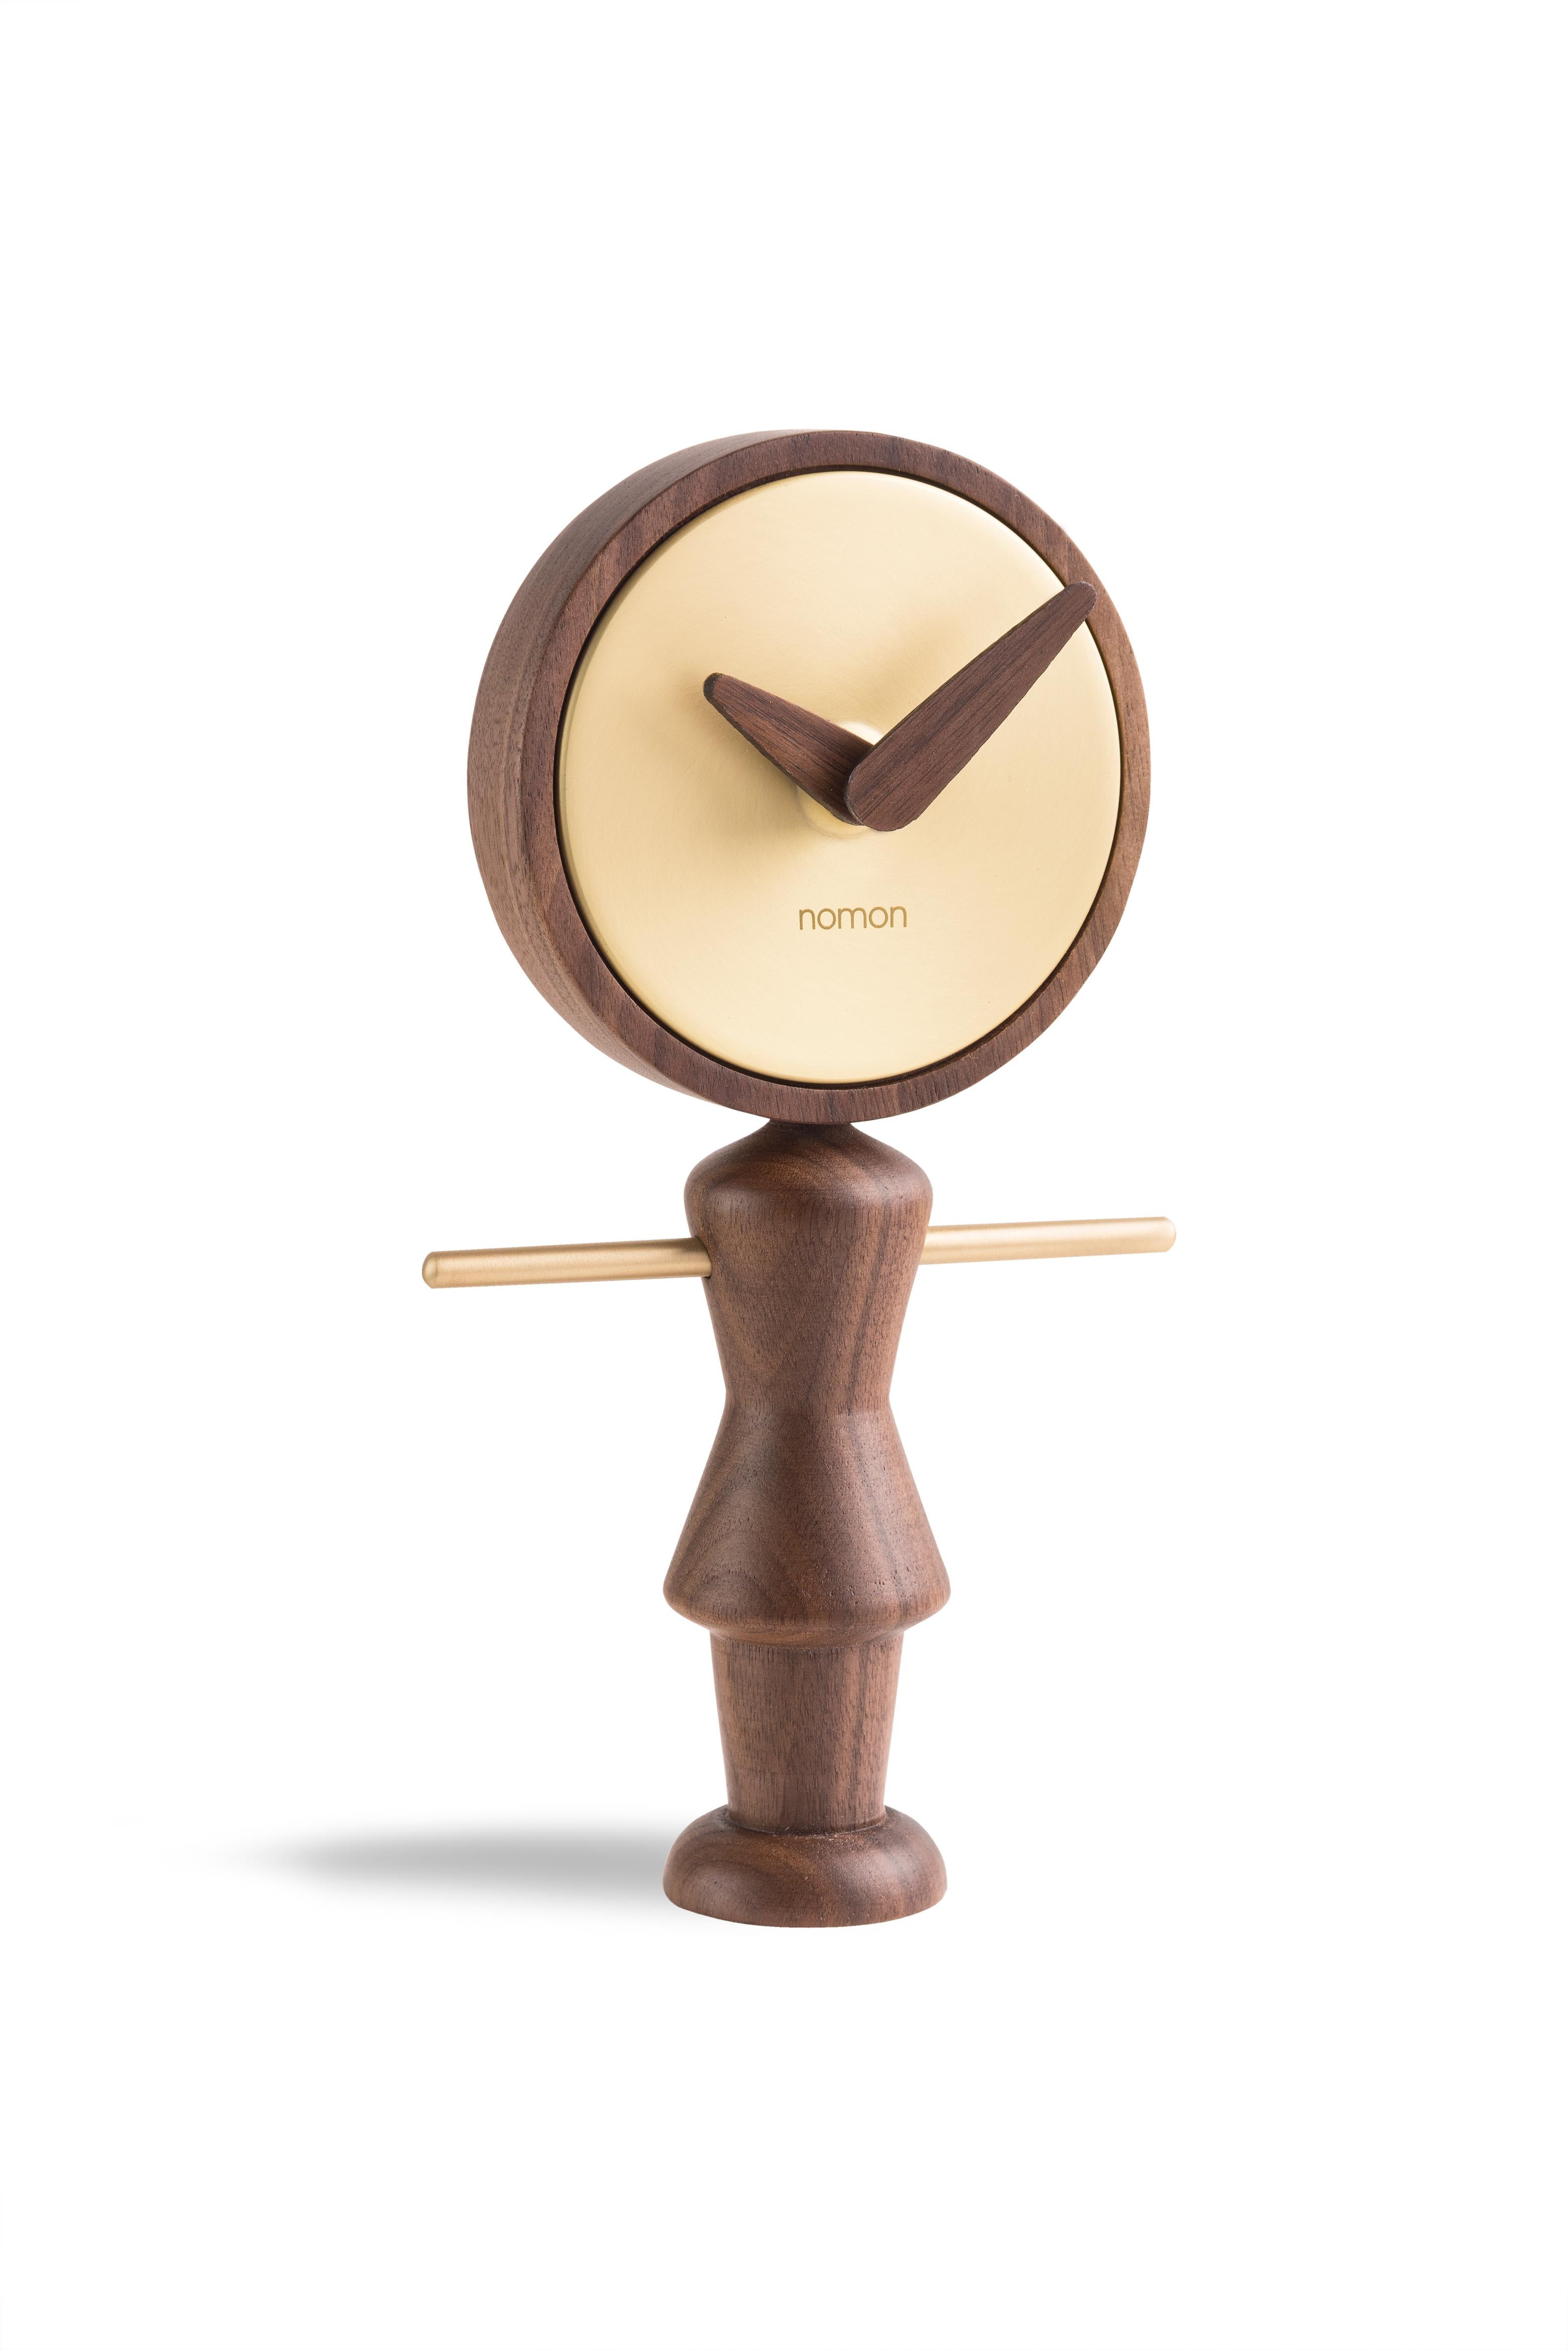 Nomon Nena & Nene Table  Clock By Andres Martinez In New Condition For Sale In Brooklyn, NY